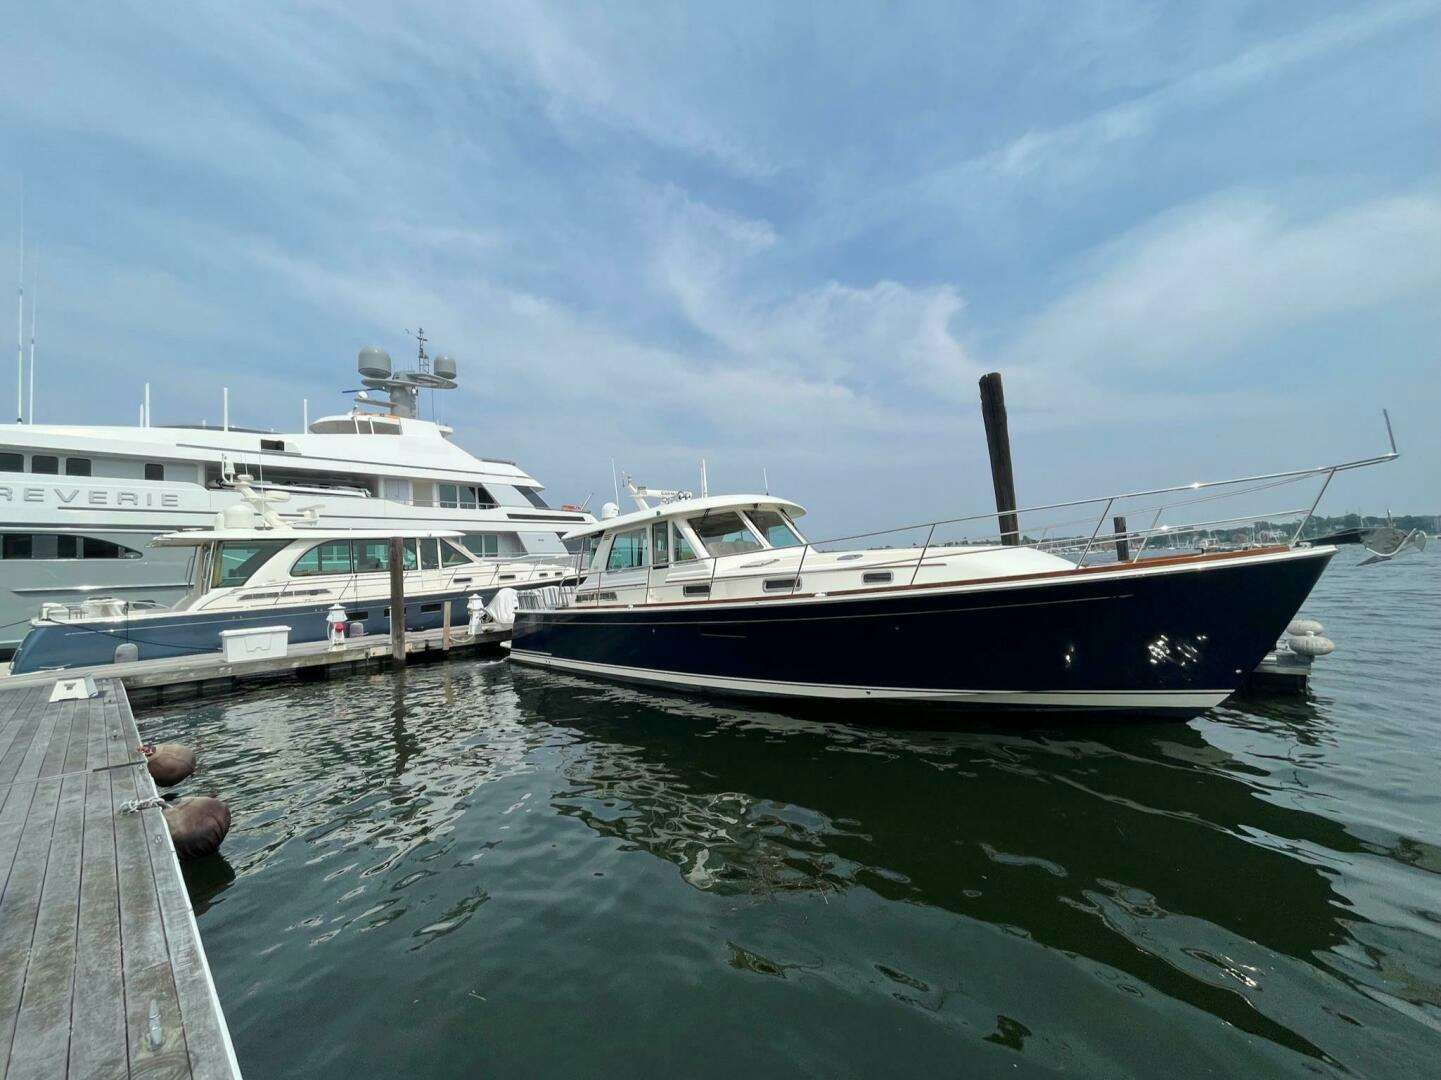 Tutorial
Yacht for Sale